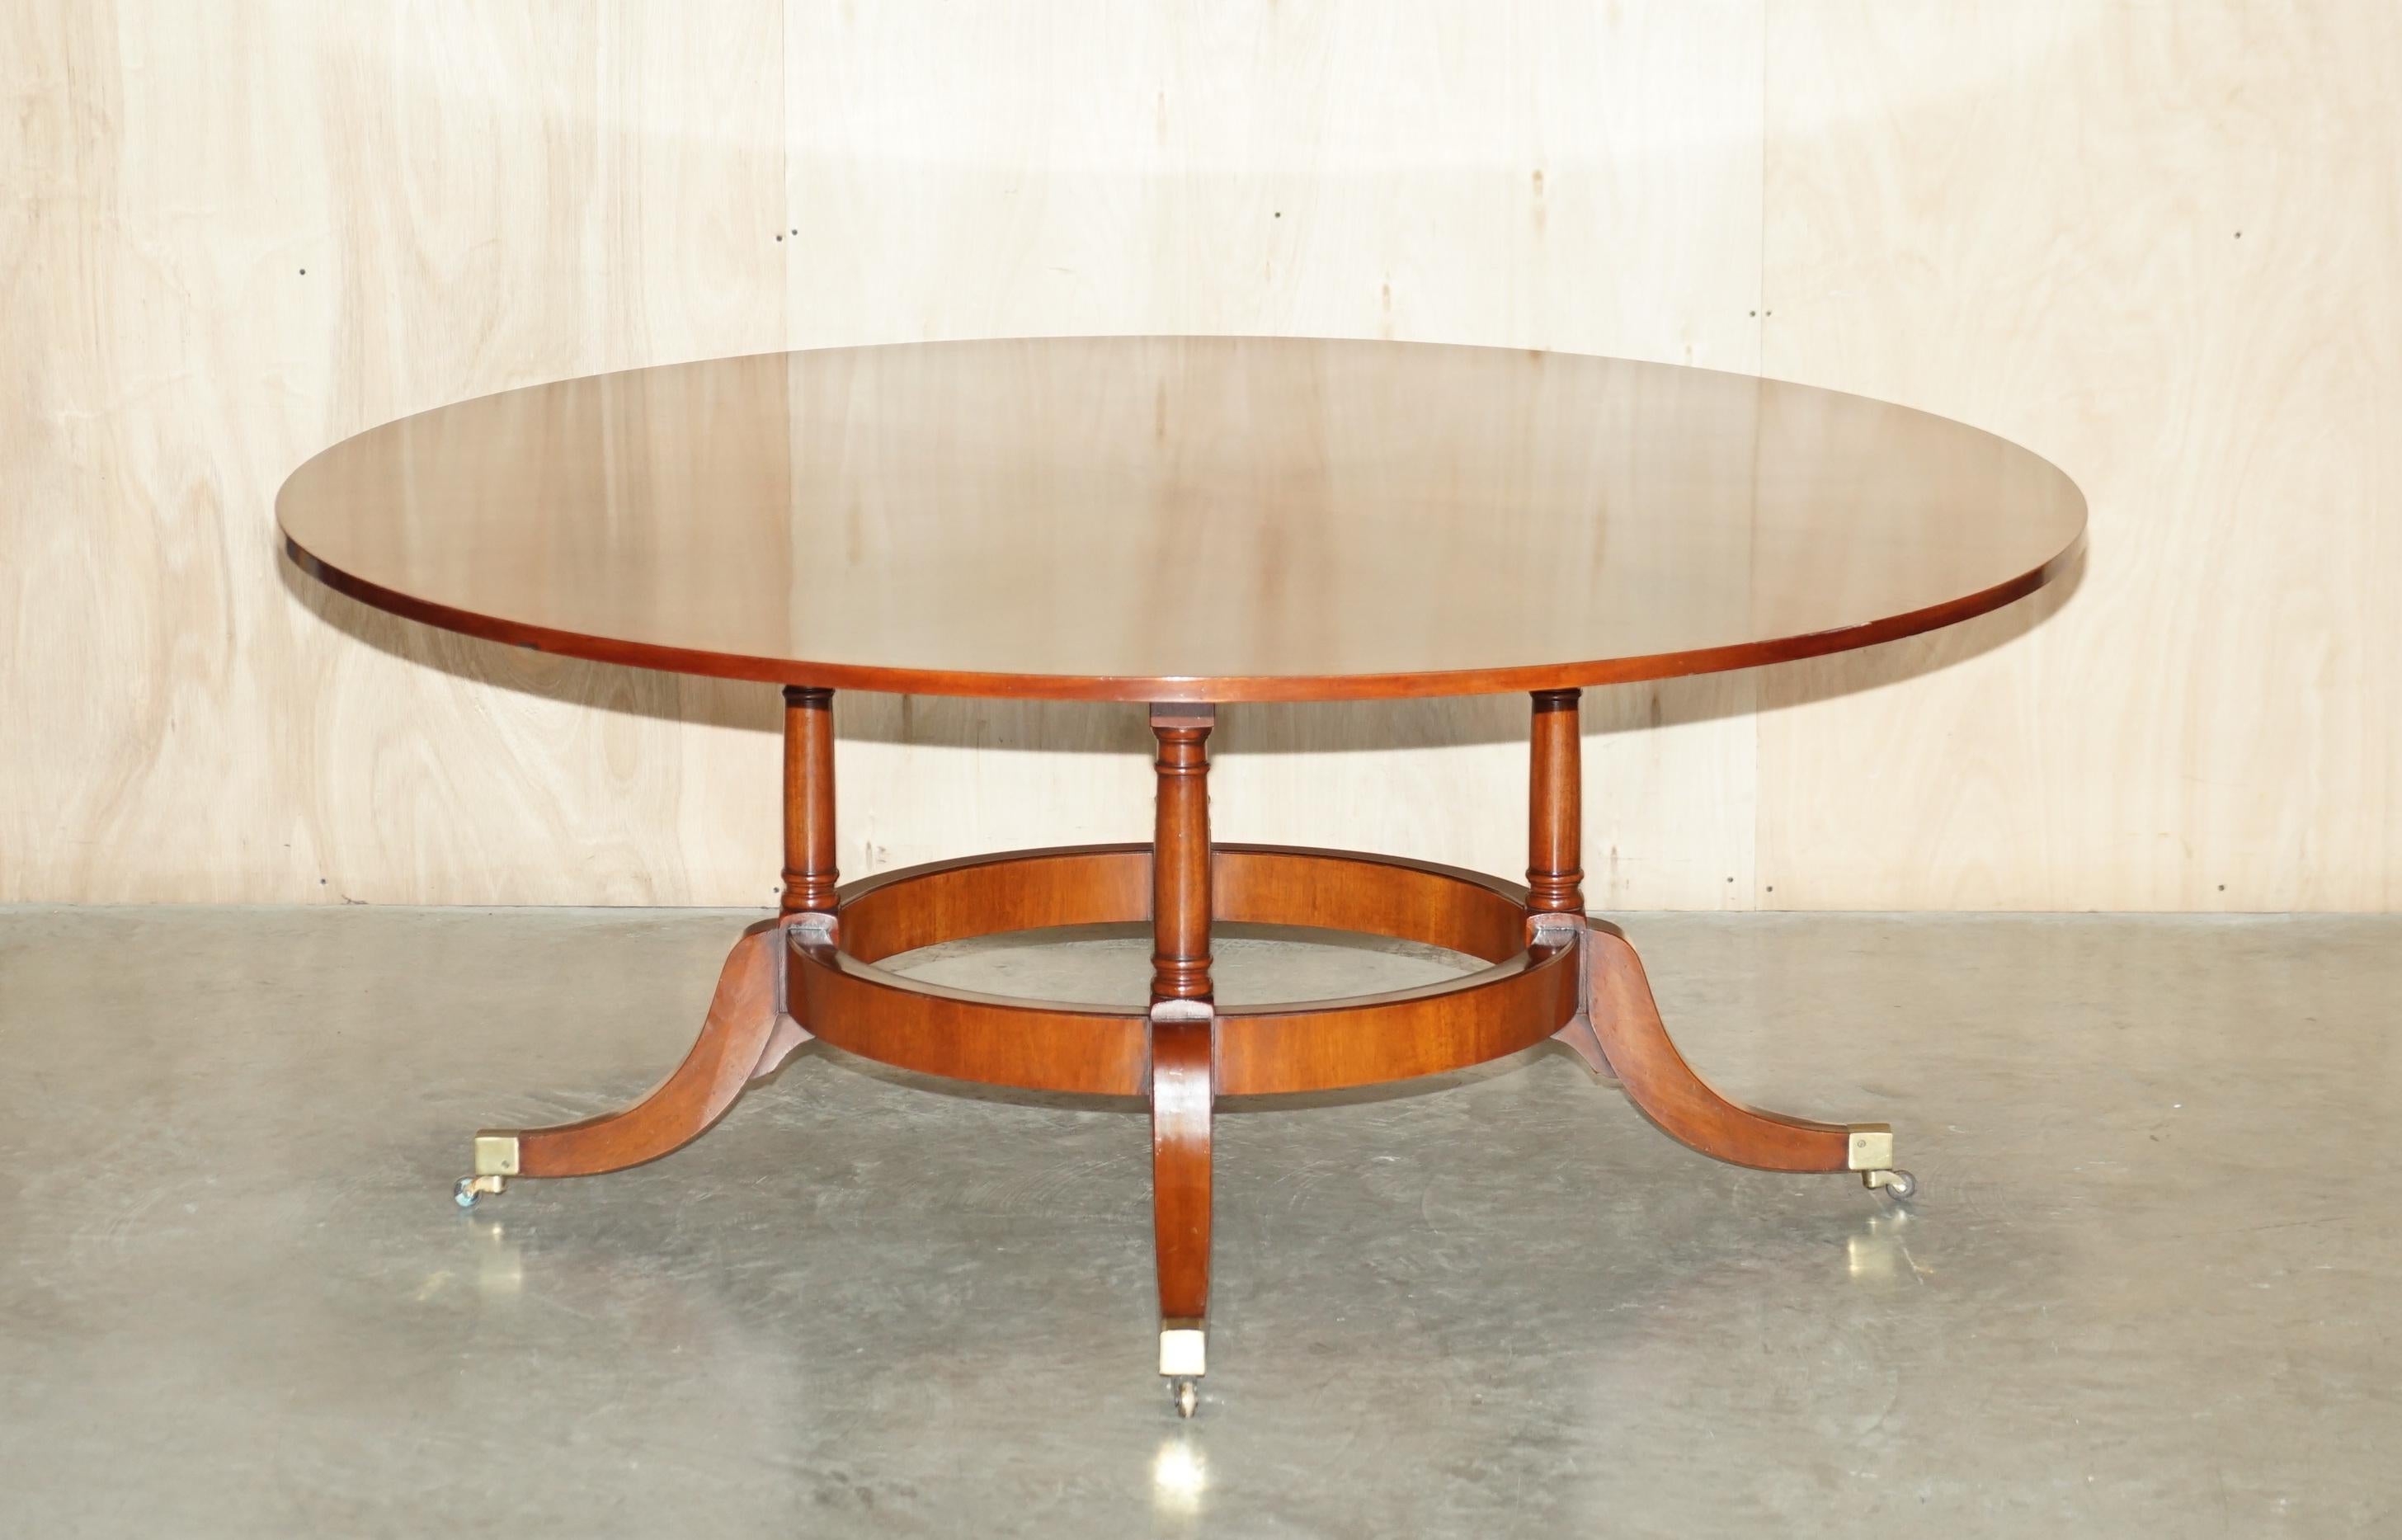 We are delighted to offer for sale this lovely handmade Burr Yew and Walnut dining table

A good looking and well made piece, size wise it can be used as a six to eight person dining table or as a magnificent centre table to be placed in the